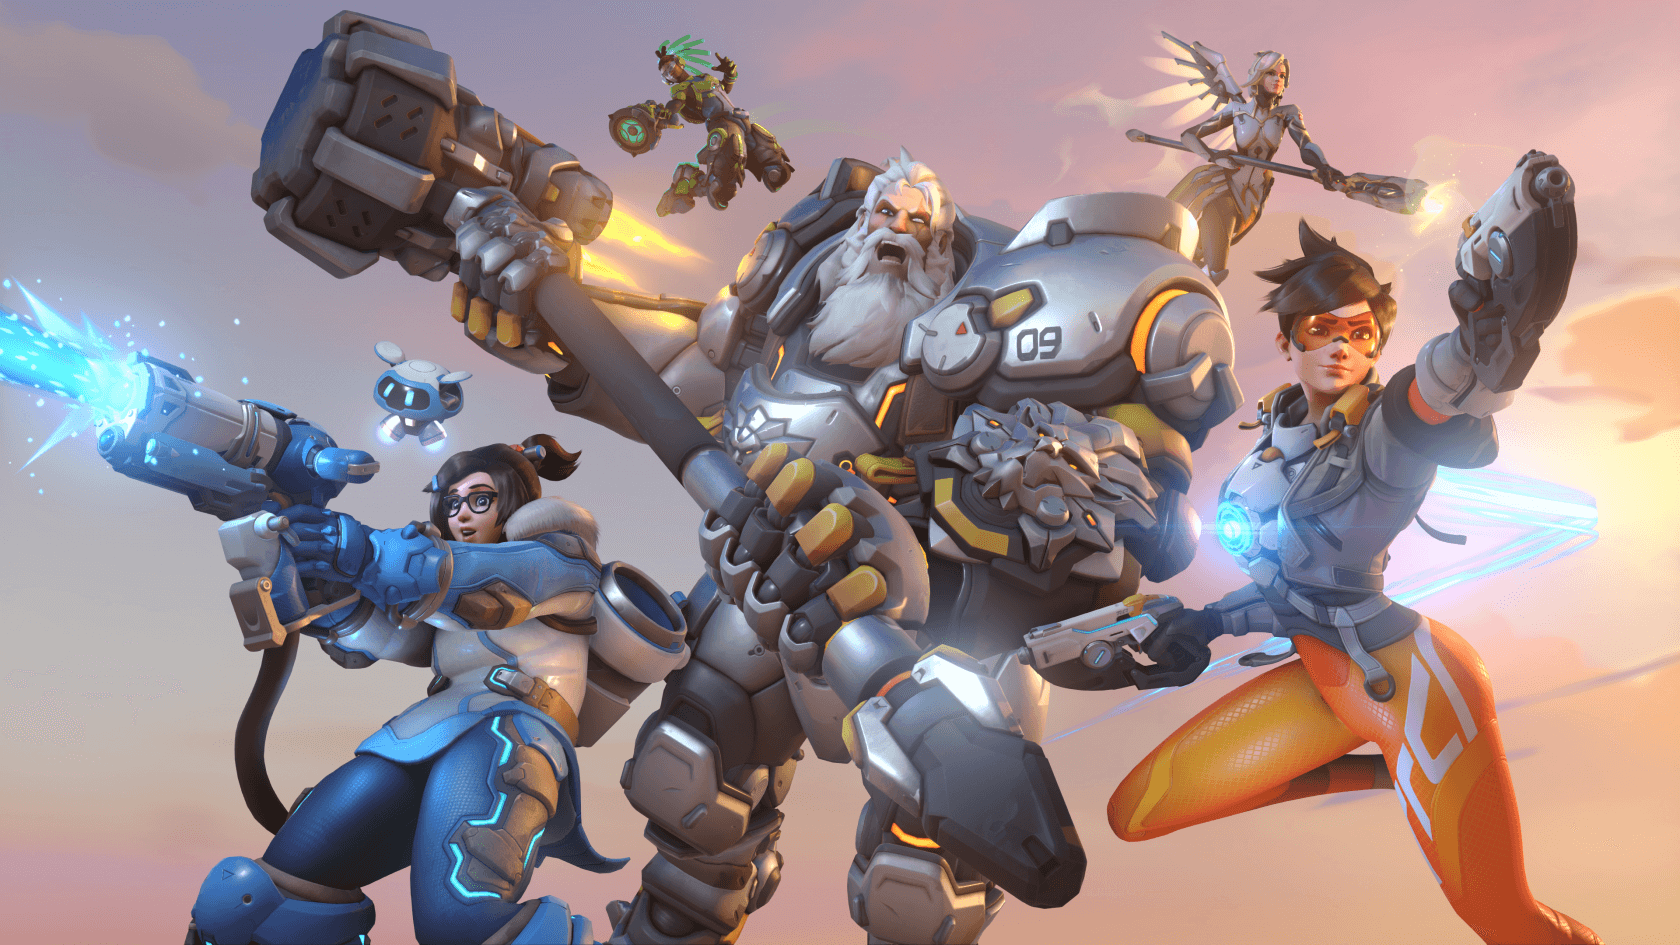 Jeff Kaplan: I Want to Challenge the Industry on What a Sequel is with Overwatch 2